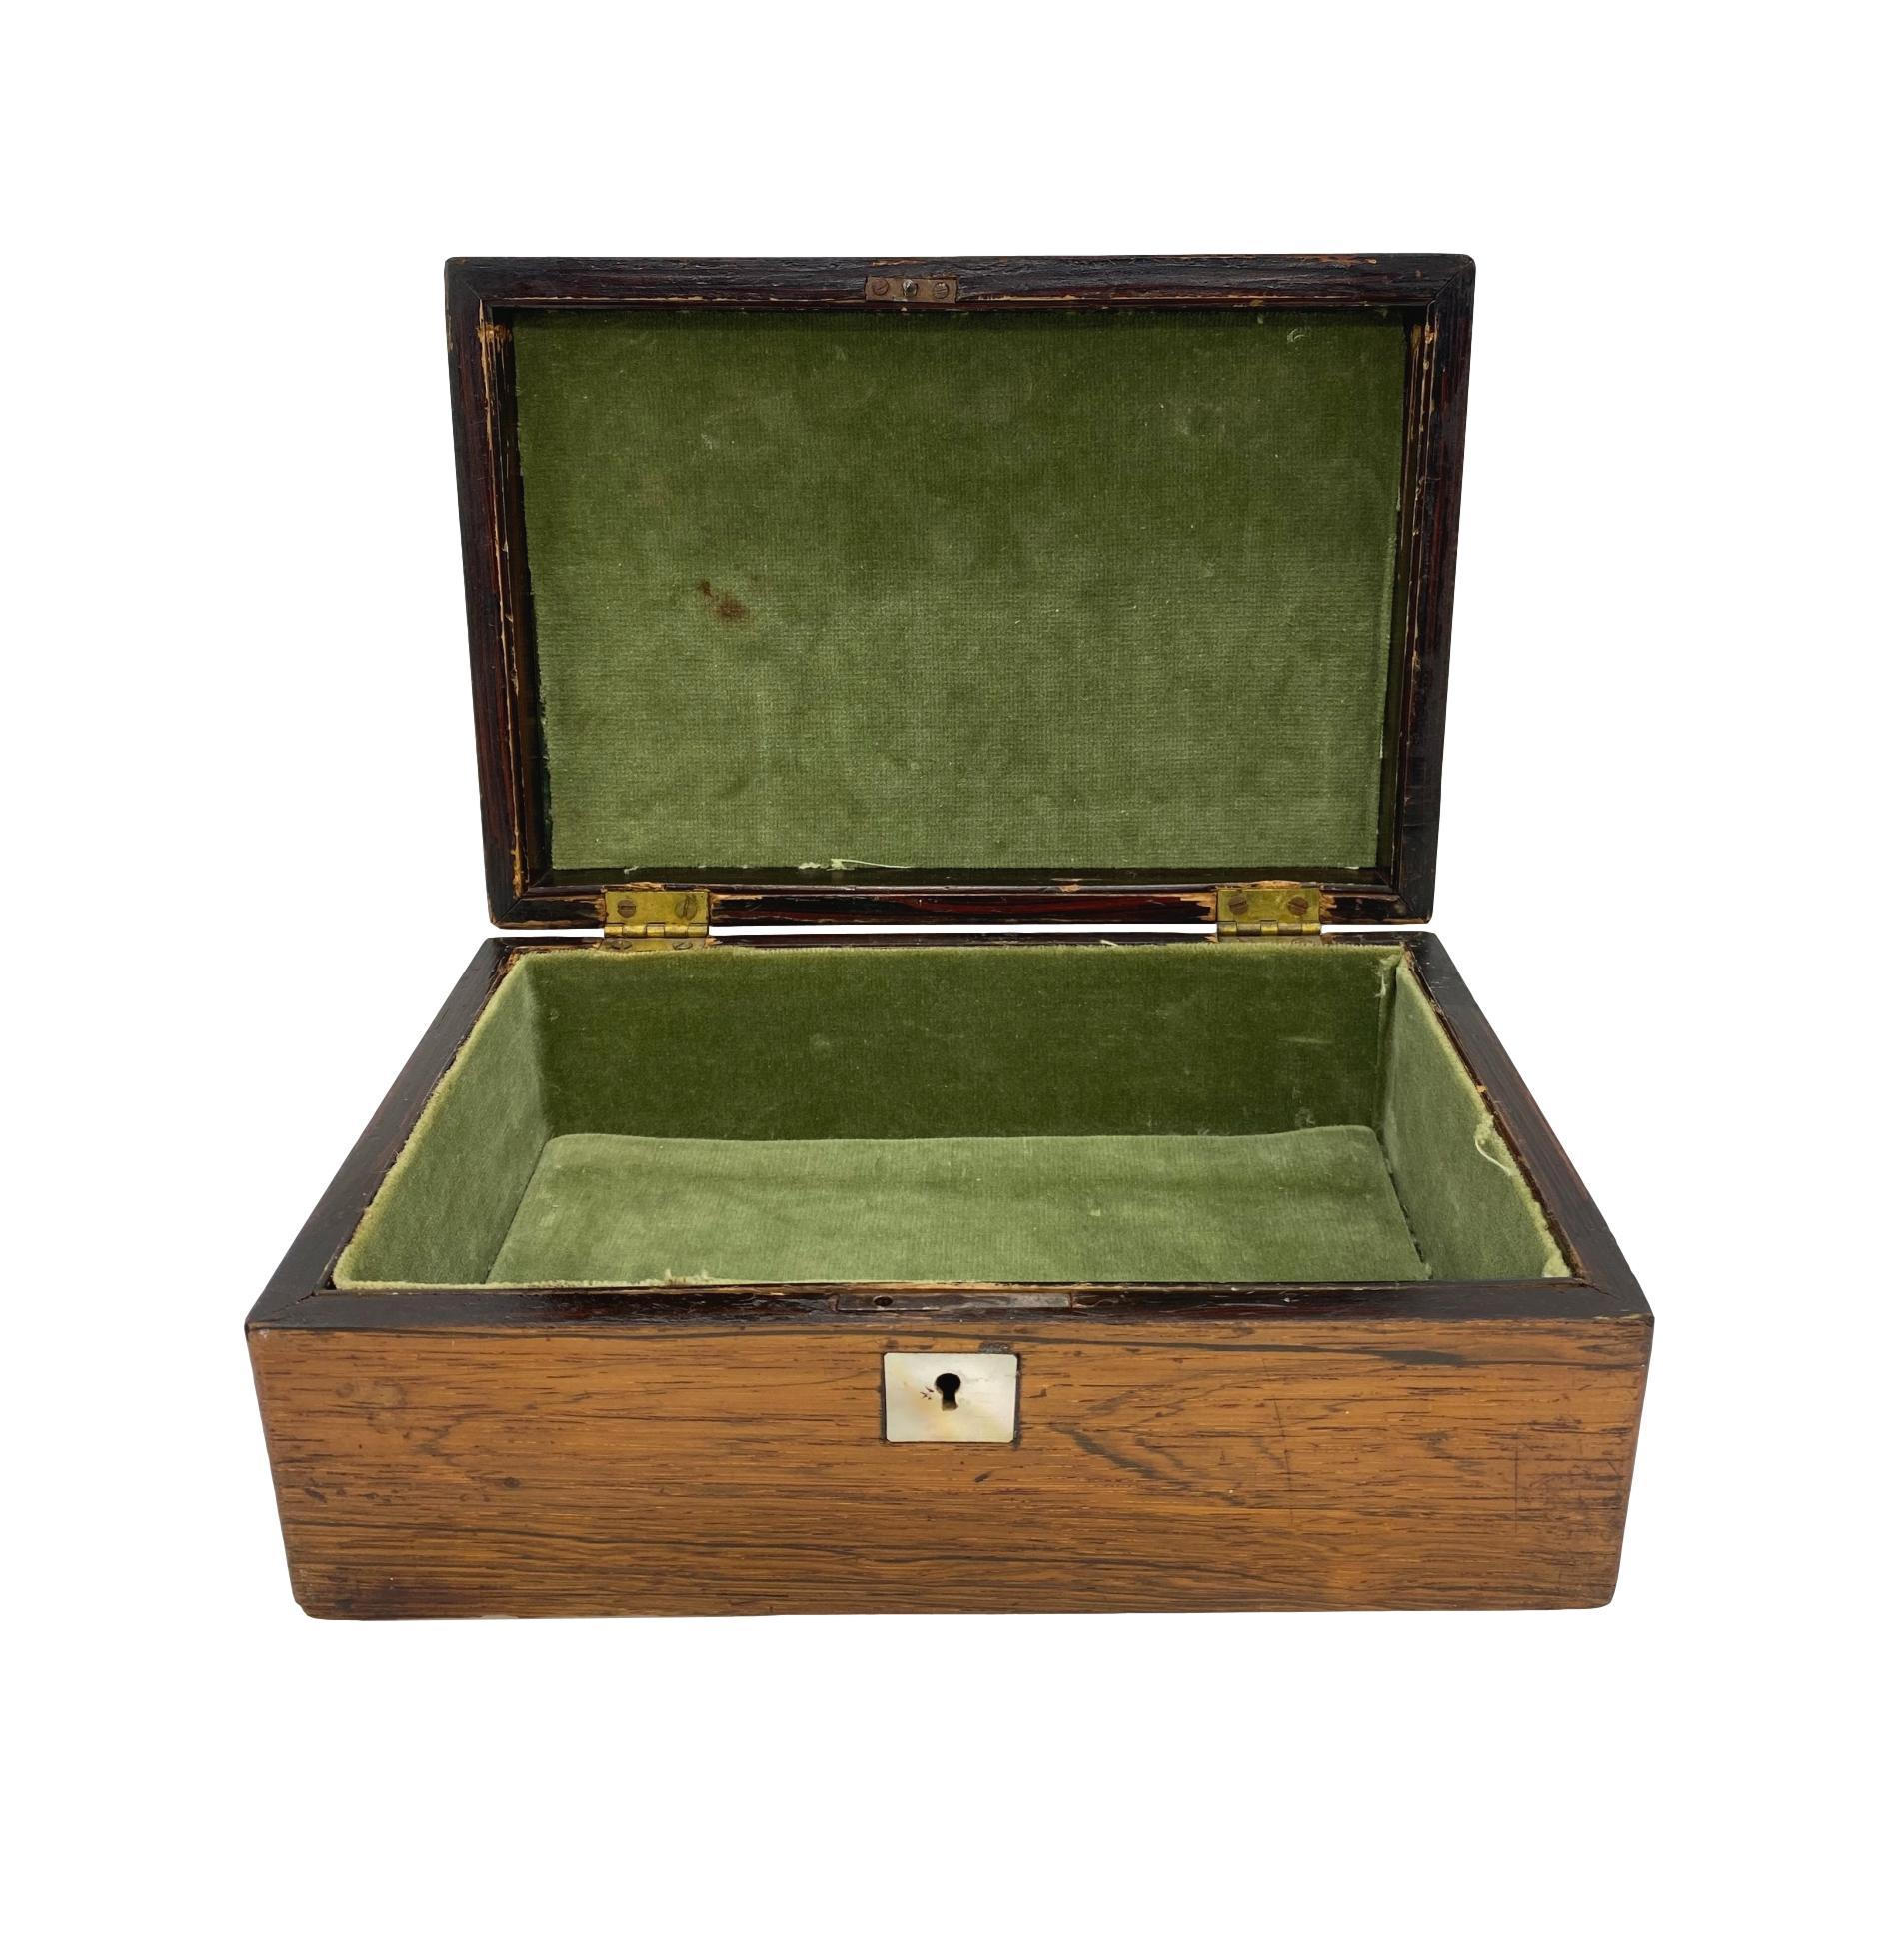 Antique rosewood stationery box with fine inlaid mother of pearl flowers, the central inset plaque inscribed, 'Annie,' English, circa 1840.

           